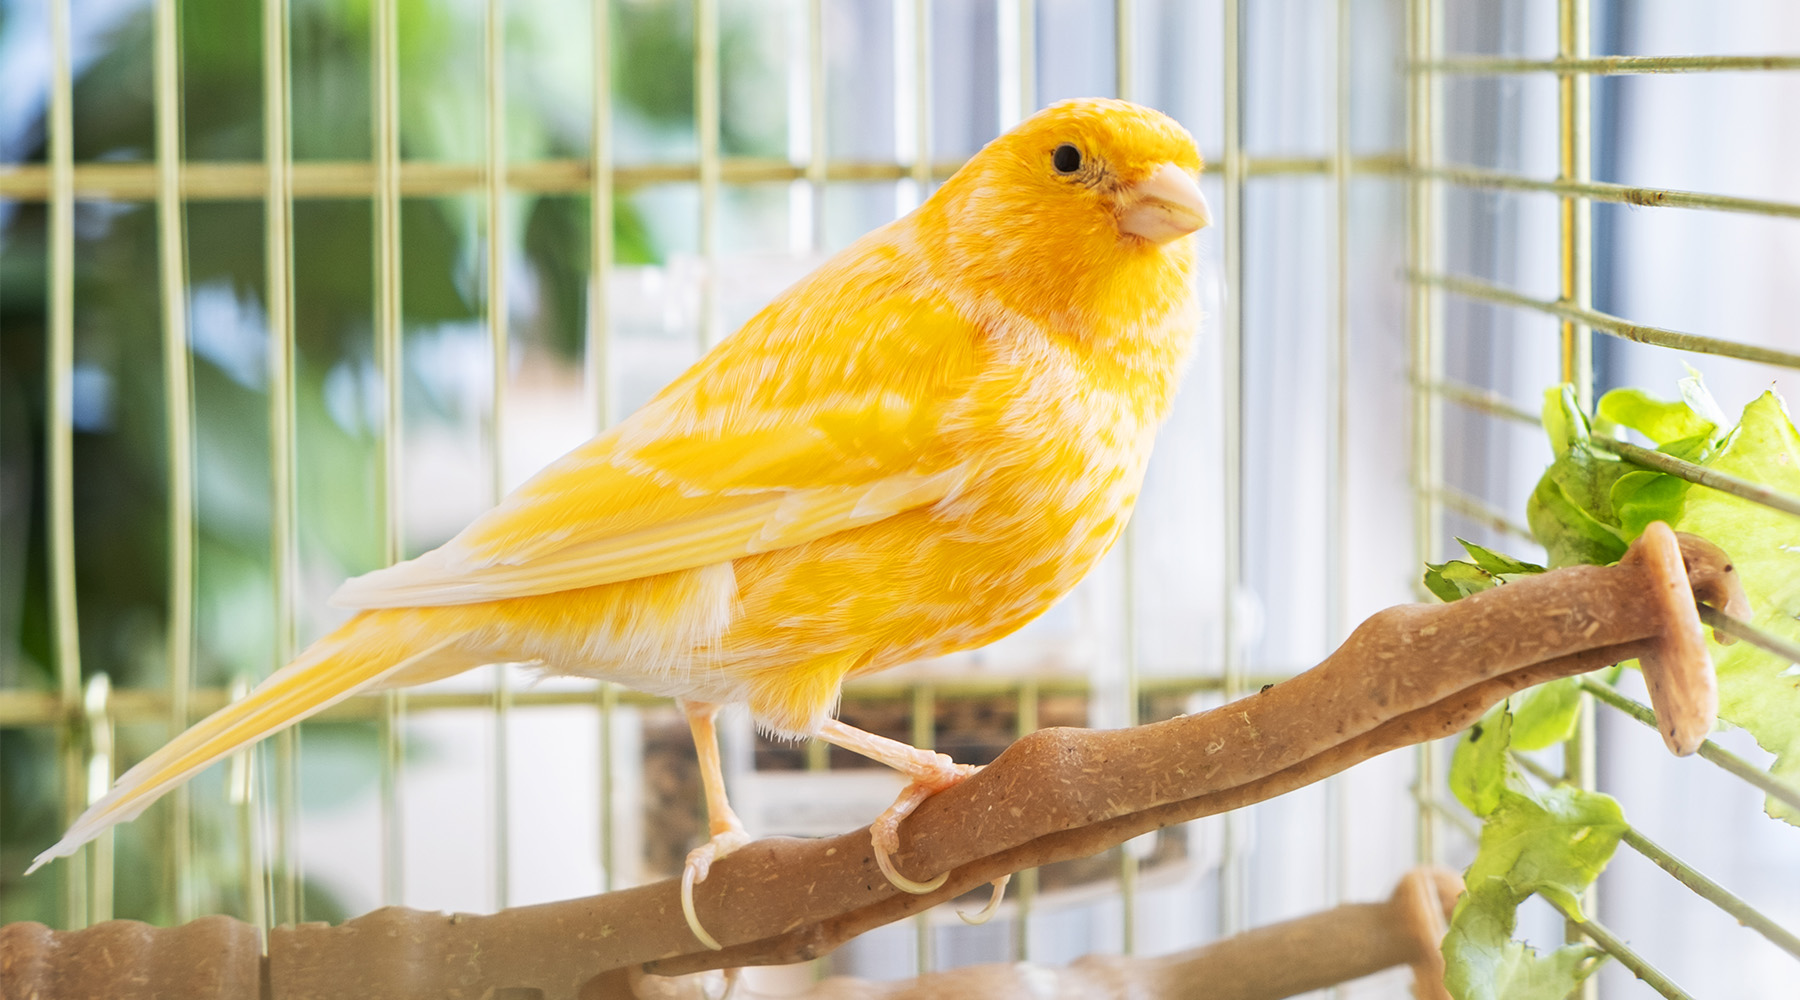 A caged yellow canary eats green grass.